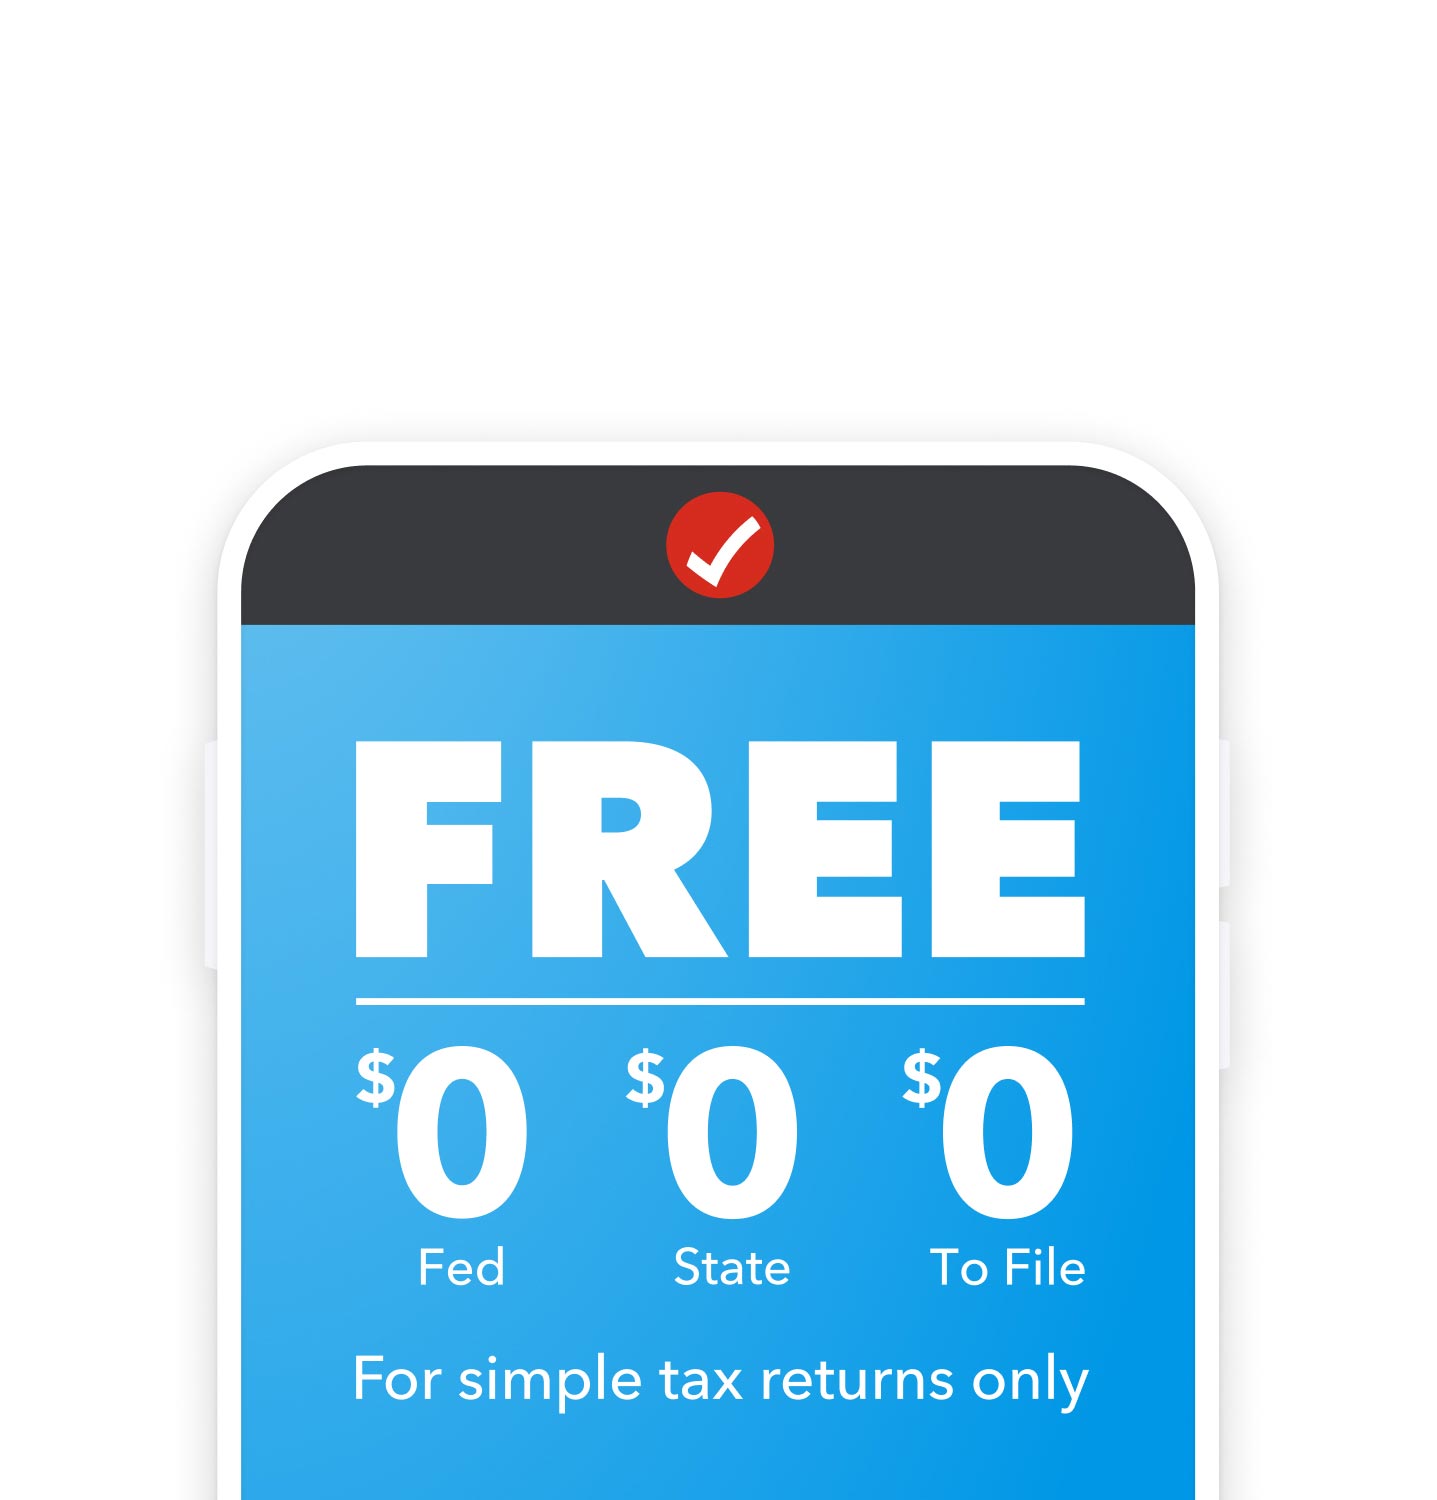 TurboTax Free Edition is absolutely free. File your fed and state taxes for $0.